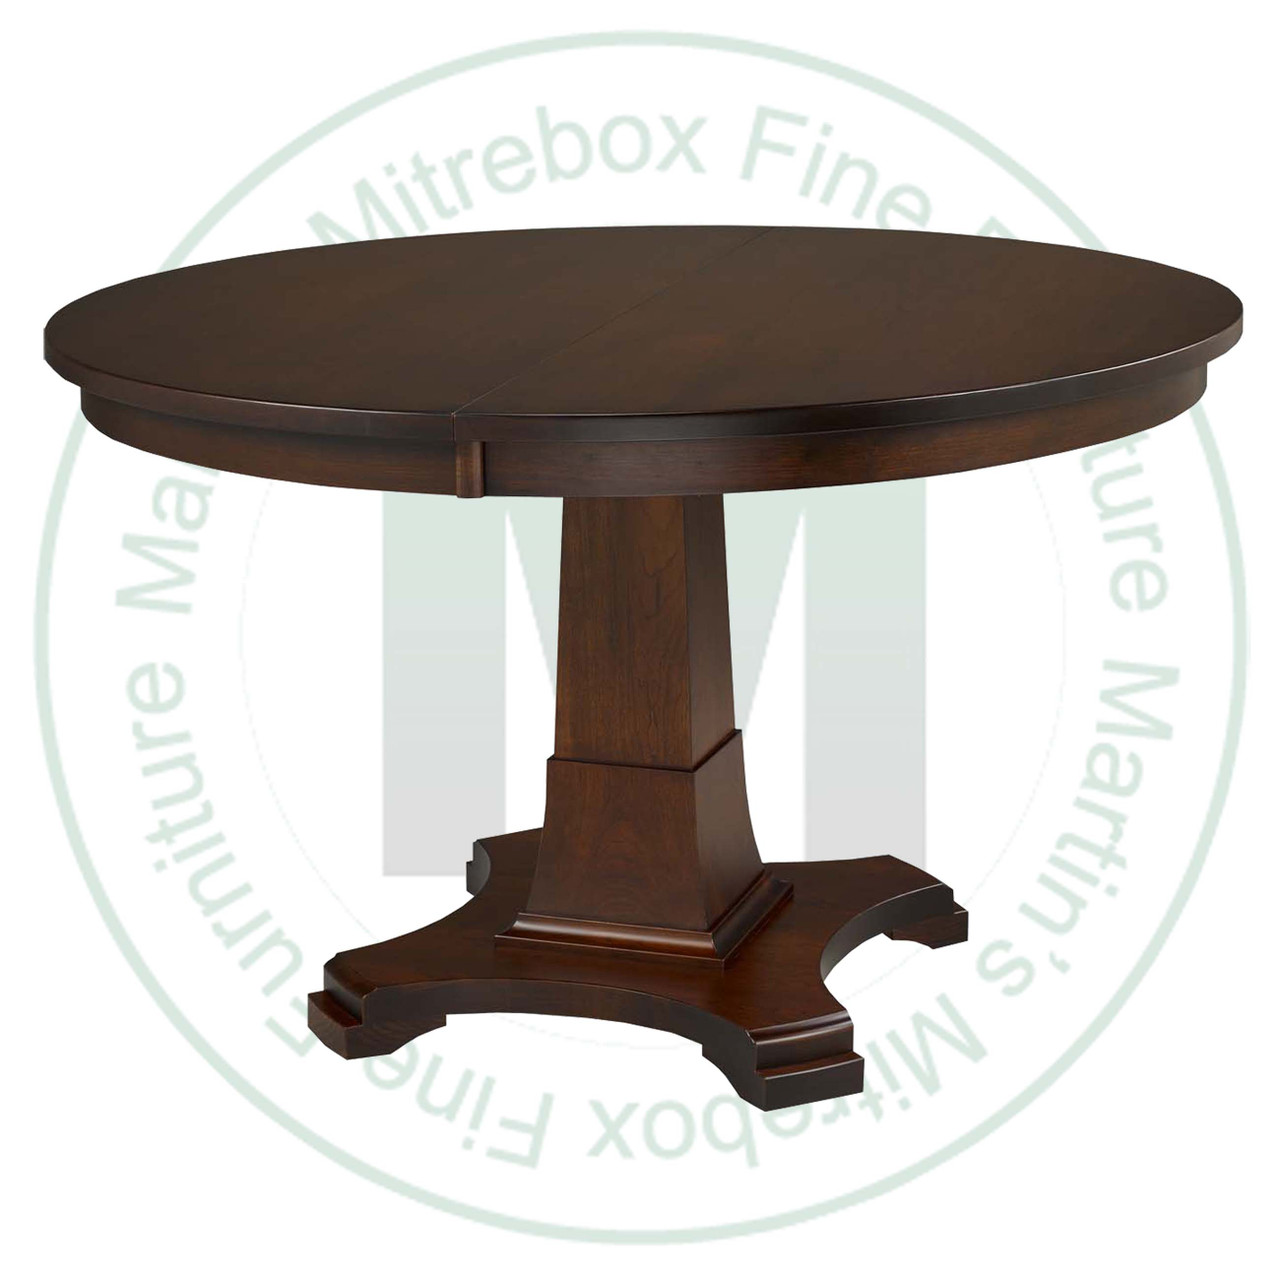 Maple Abbey Single Pedestal Table 36''D x 36''W x 30''H With 1 - 12'' Leaf. Table Has 1.25'' Thick Top